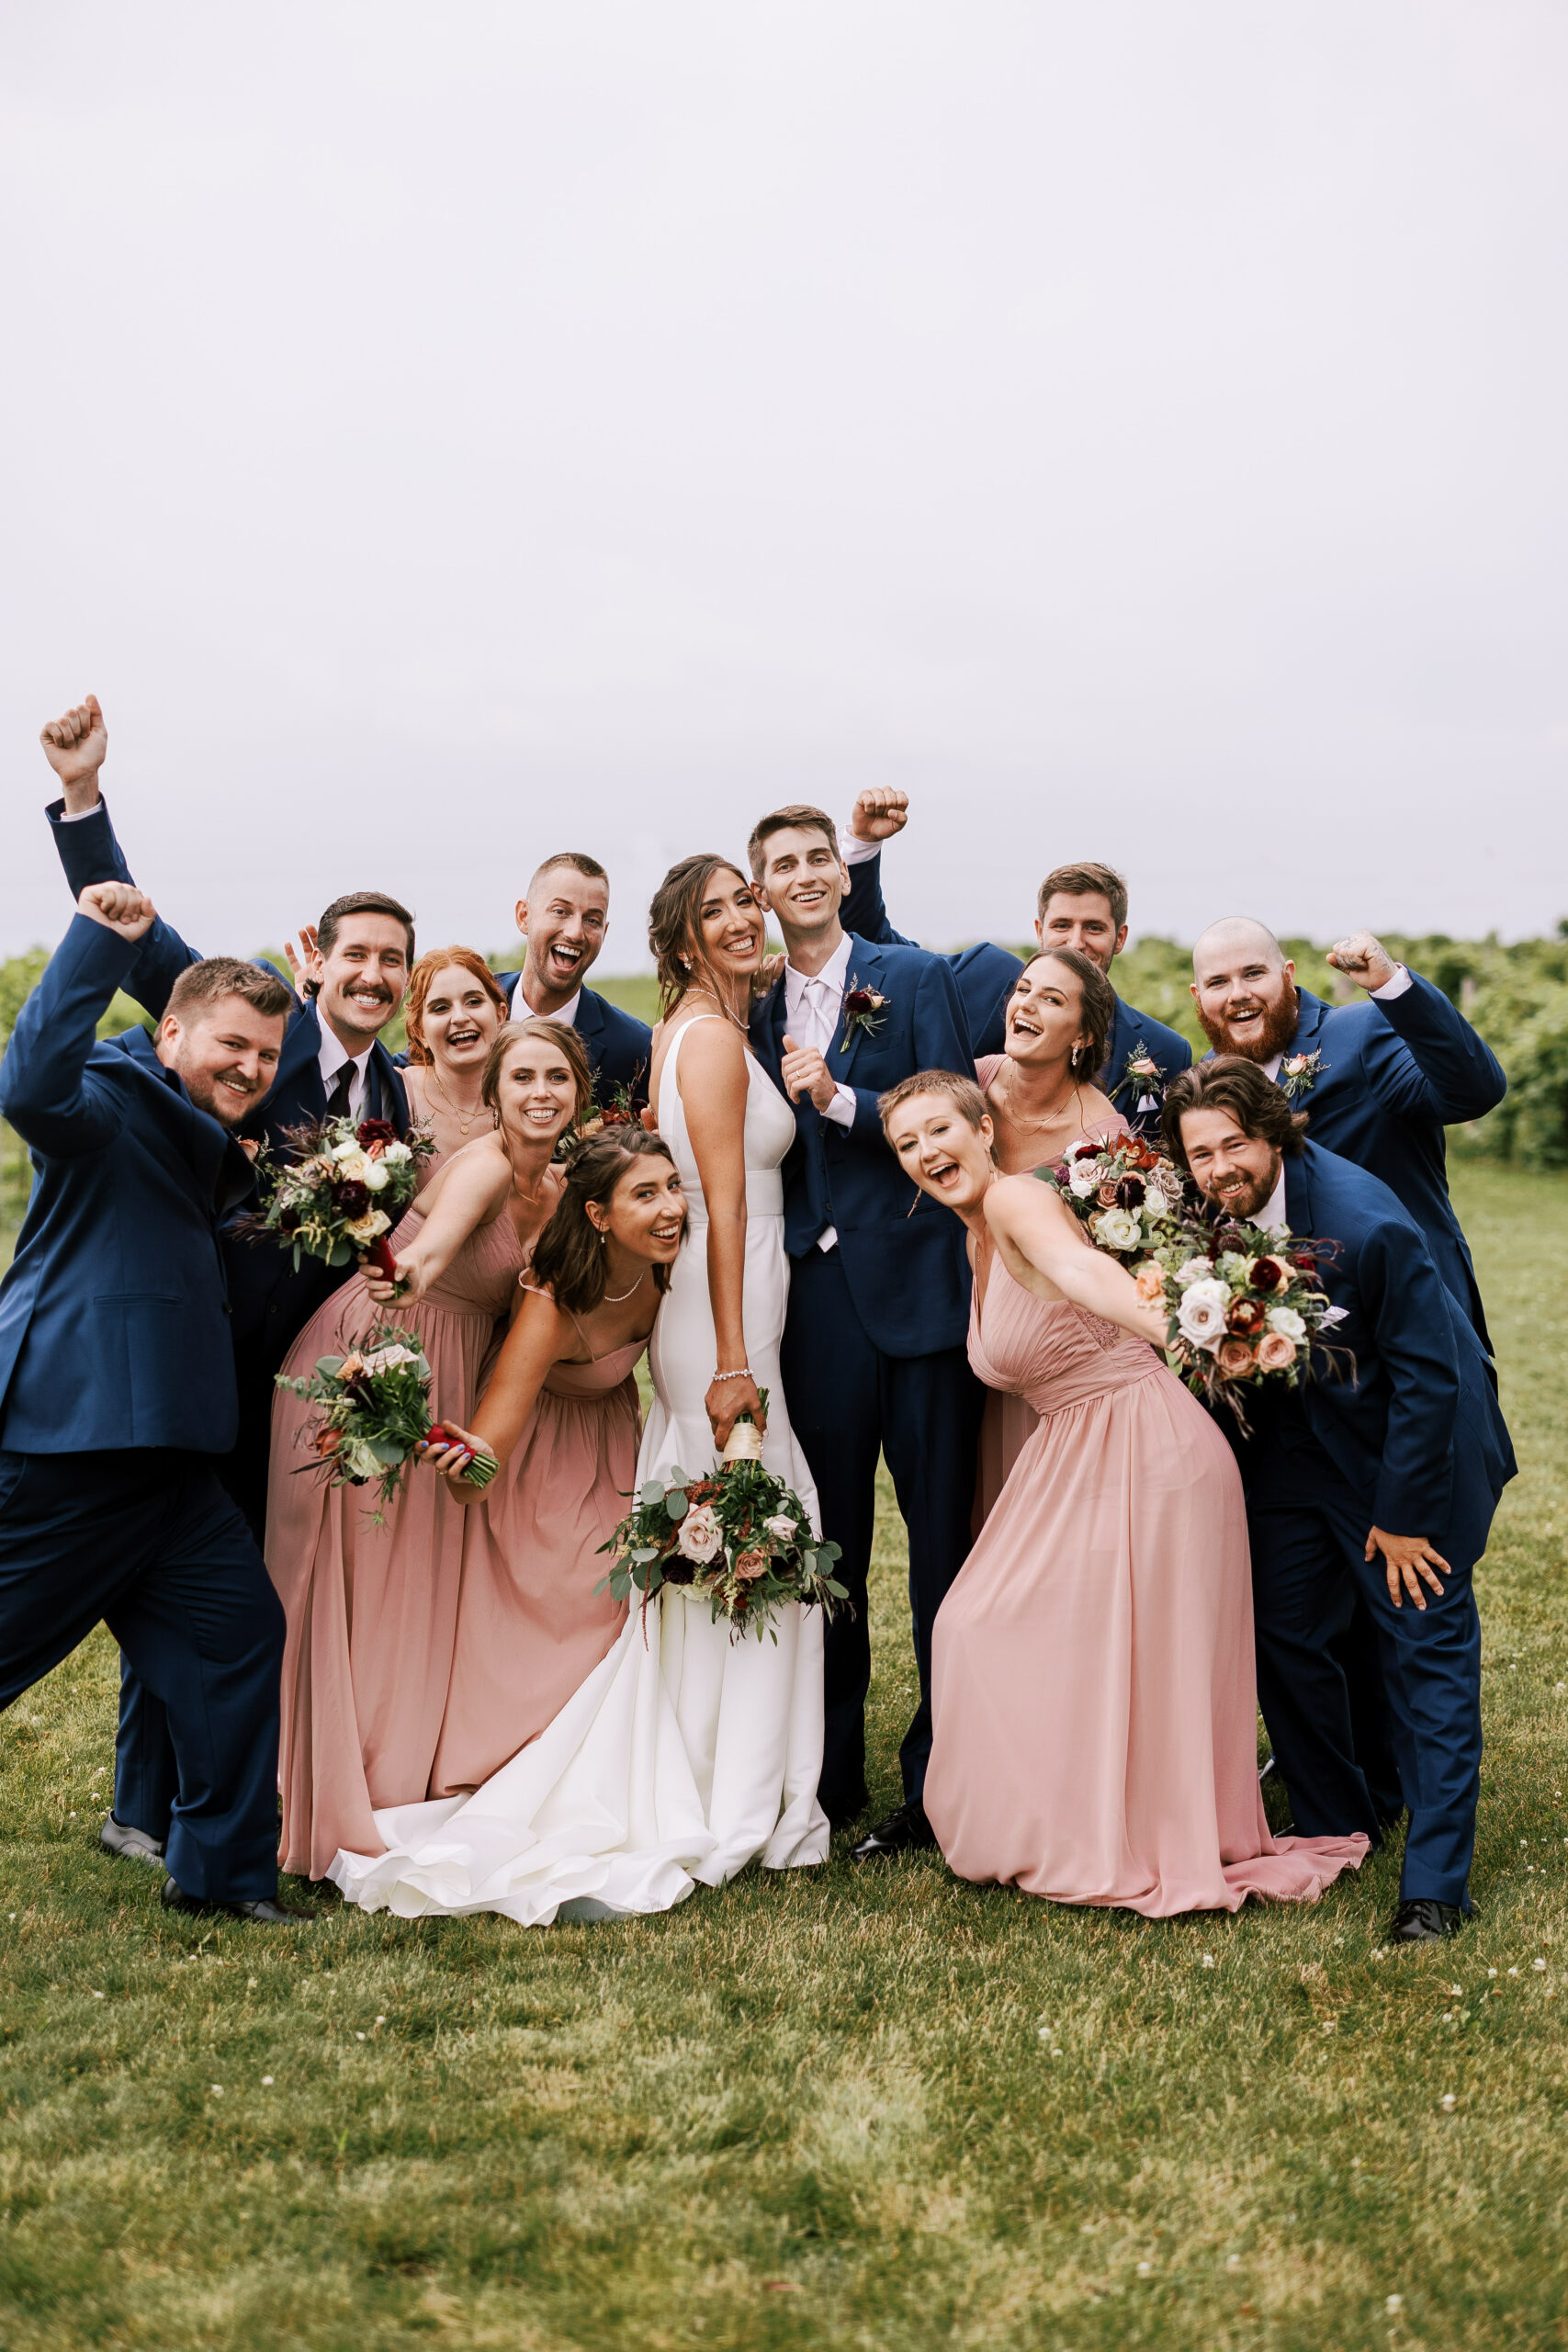 wedding party gathers around bride and groom and cheers towards the camera